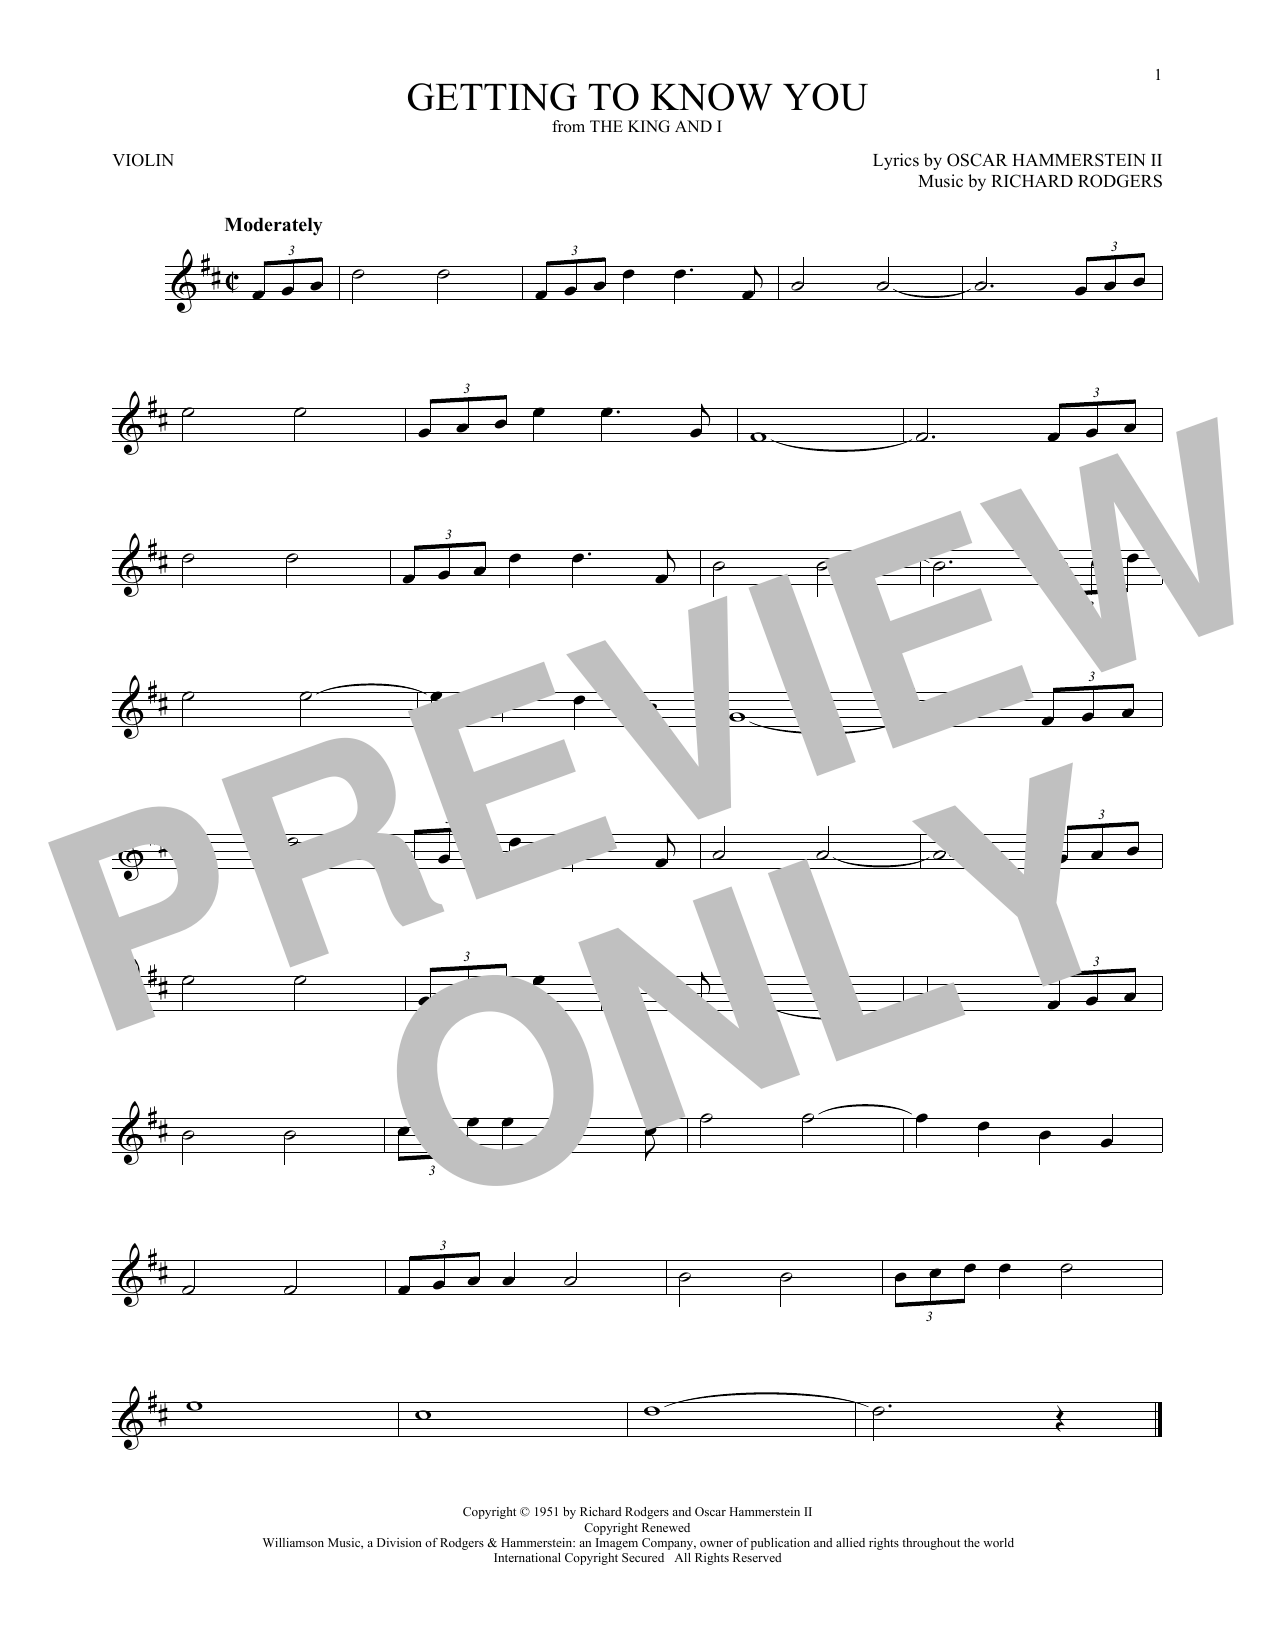 Download Rodgers & Hammerstein Getting To Know You Sheet Music